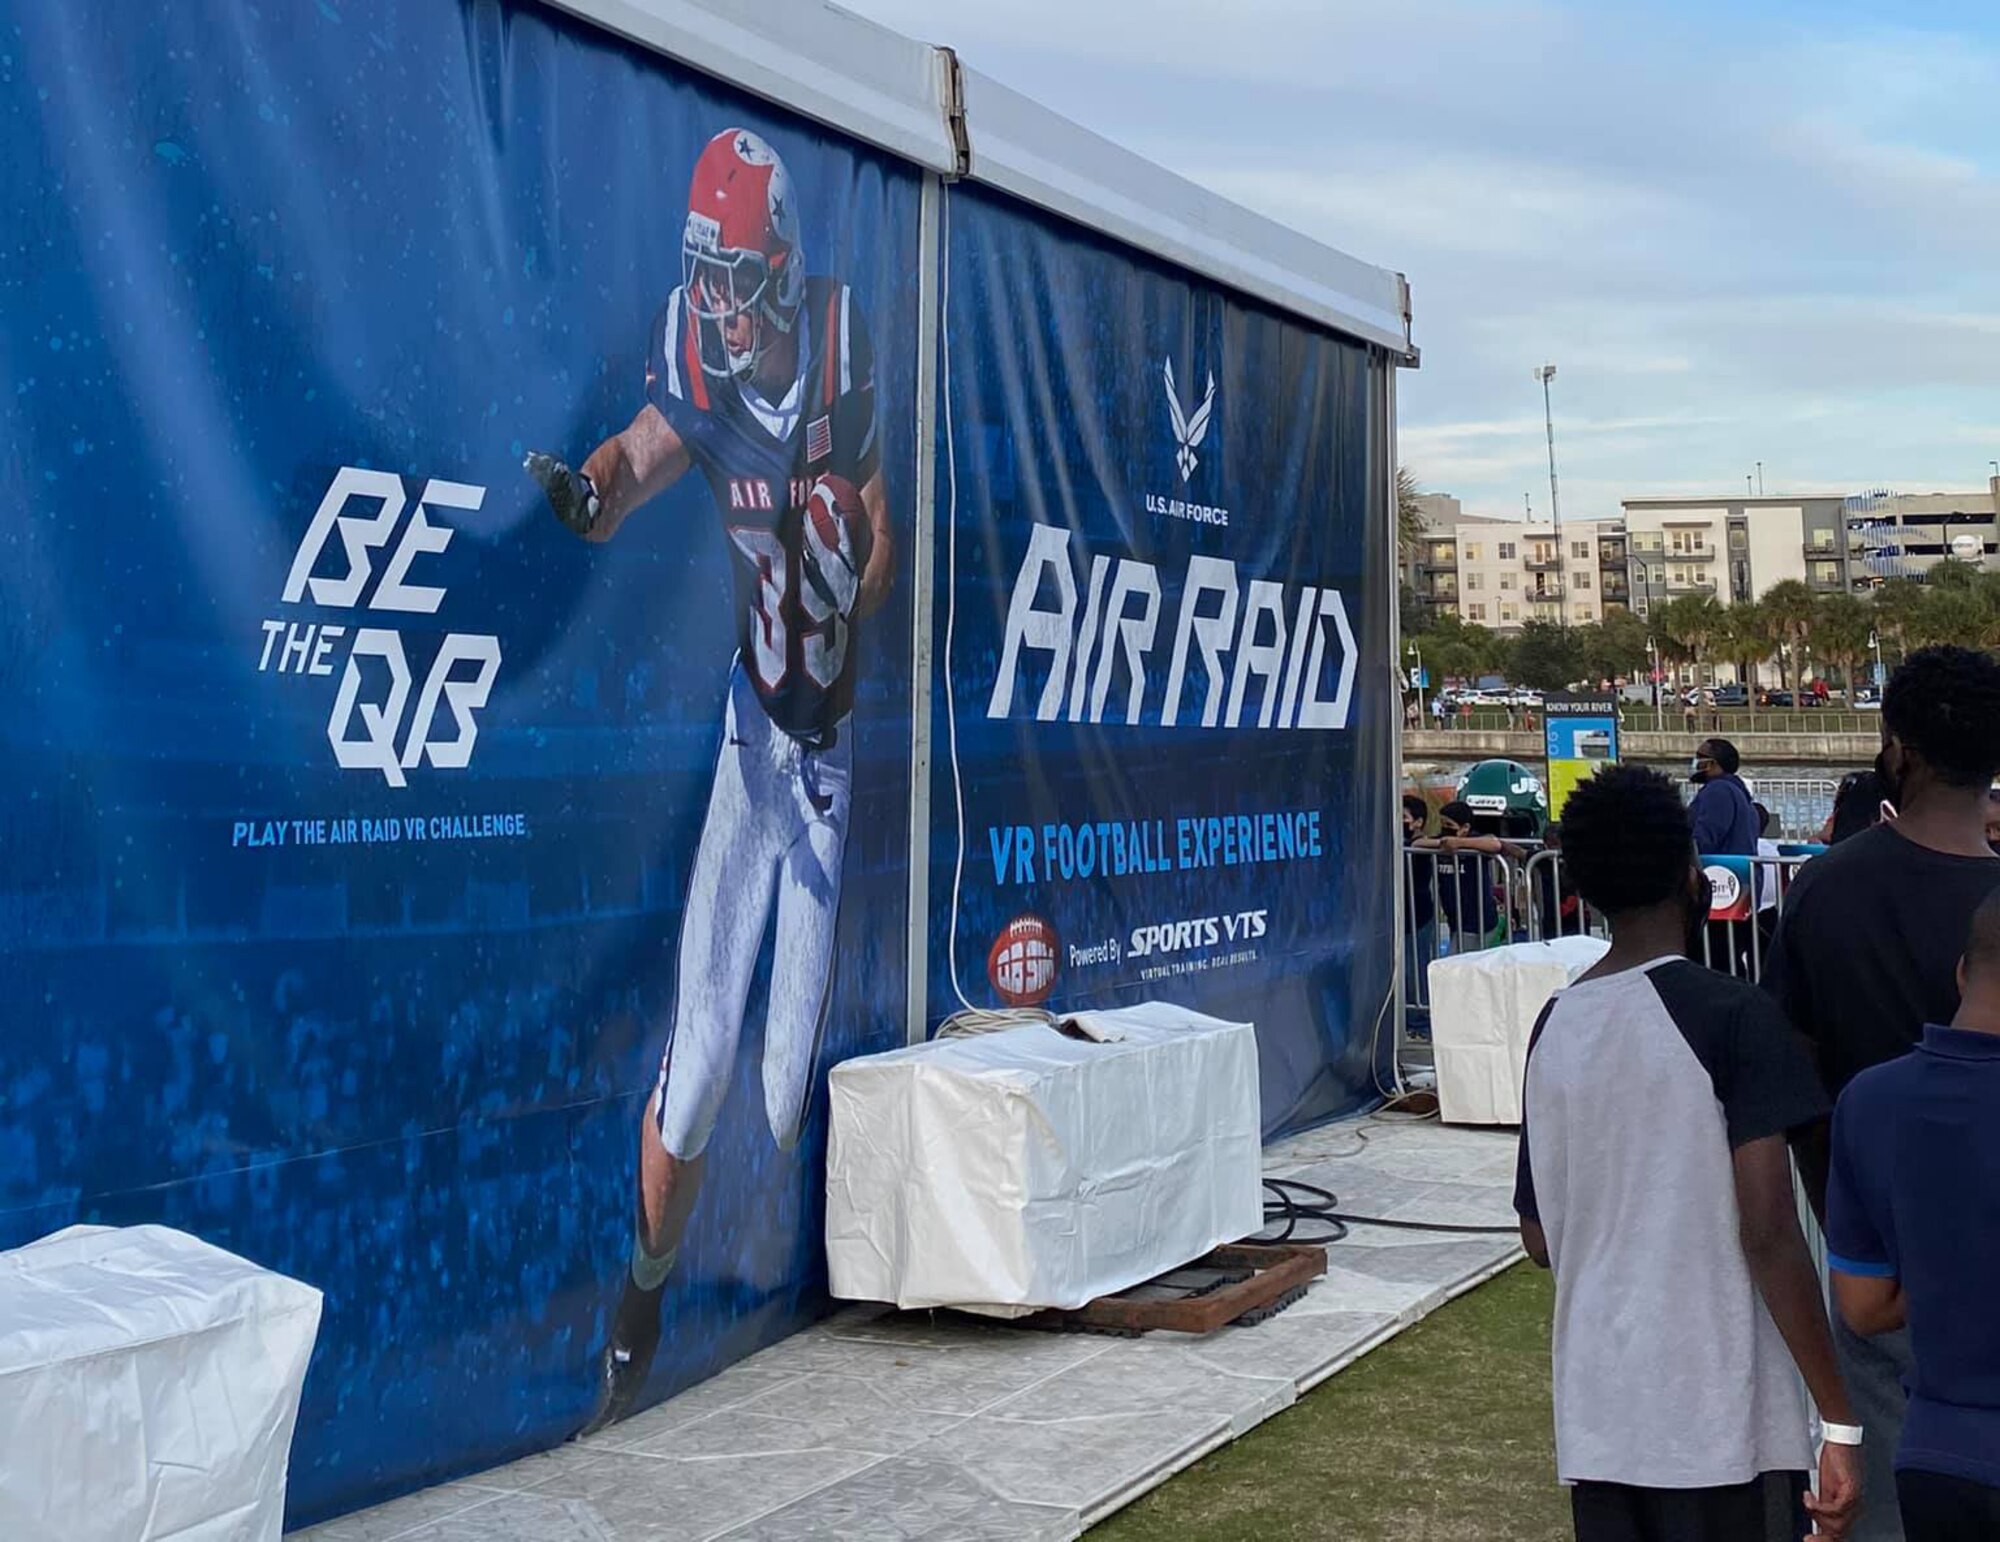 Super Bowl fans wait in line to experience the Air Force’s AIR RAID QB SIM Experience at the Super Bowl LV experience outside of Raymond James Stadium in Tampa, Florida, Jan. 31, 2021.